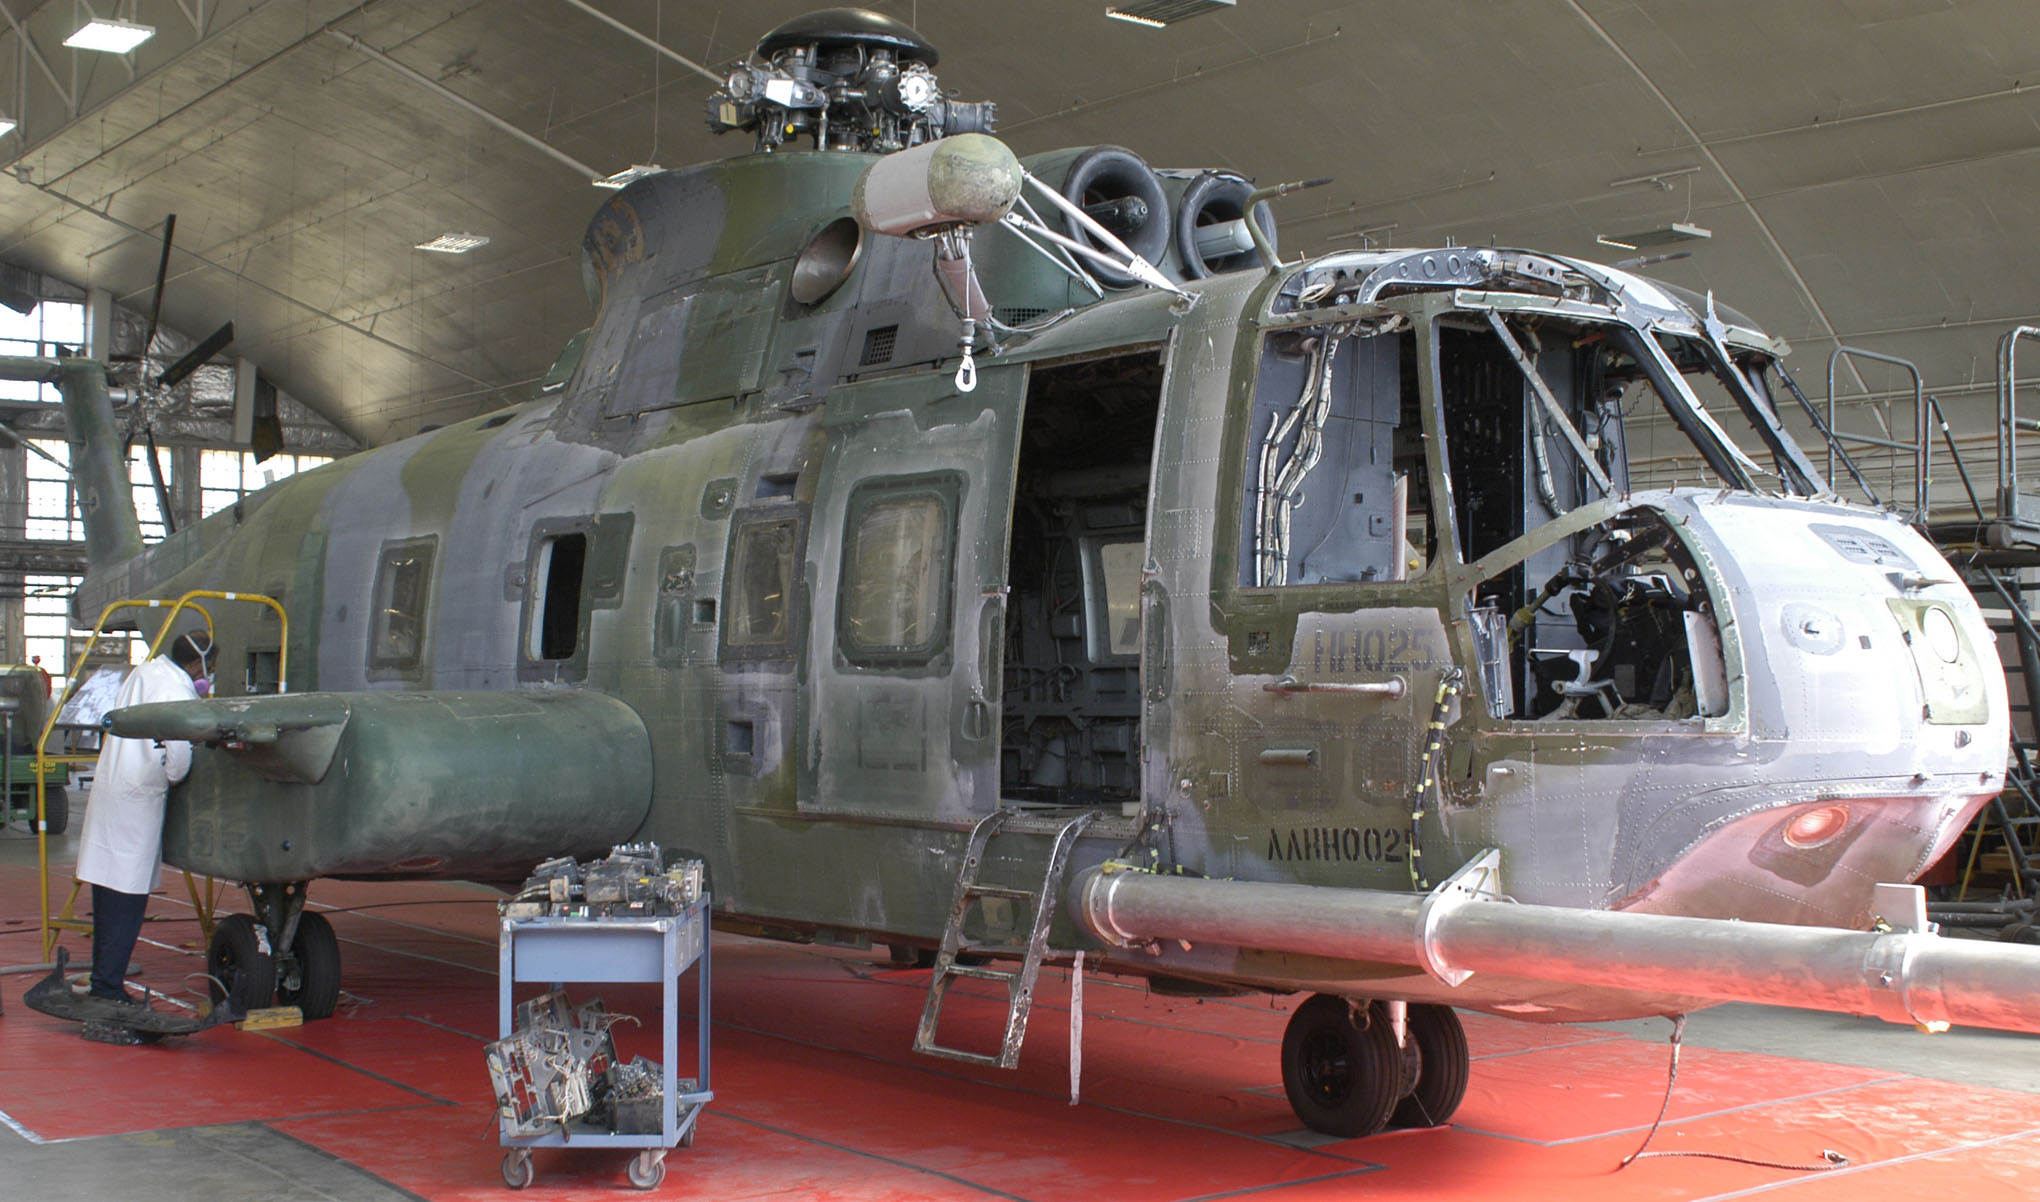 Sikorsky HH-3E 67-14709 under restoration at the National Museum of the United States Air Force, 2010. (U.S. Air Force)